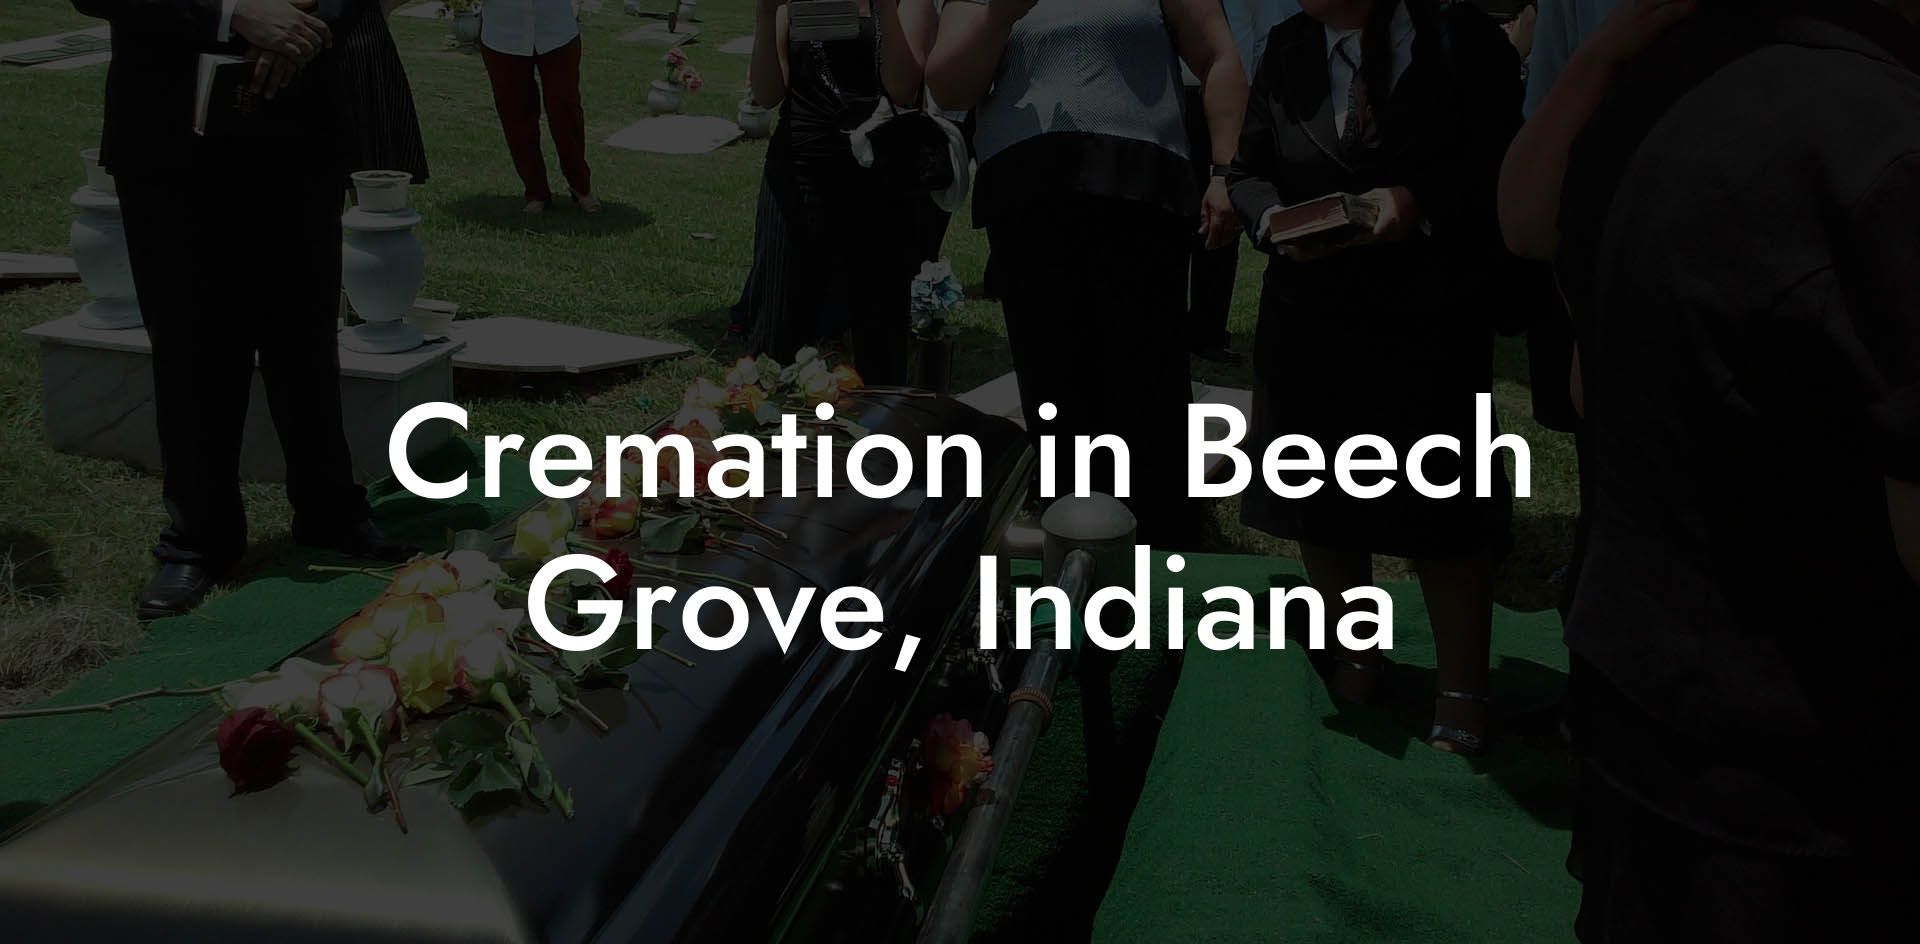 Cremation in Beech Grove, Indiana